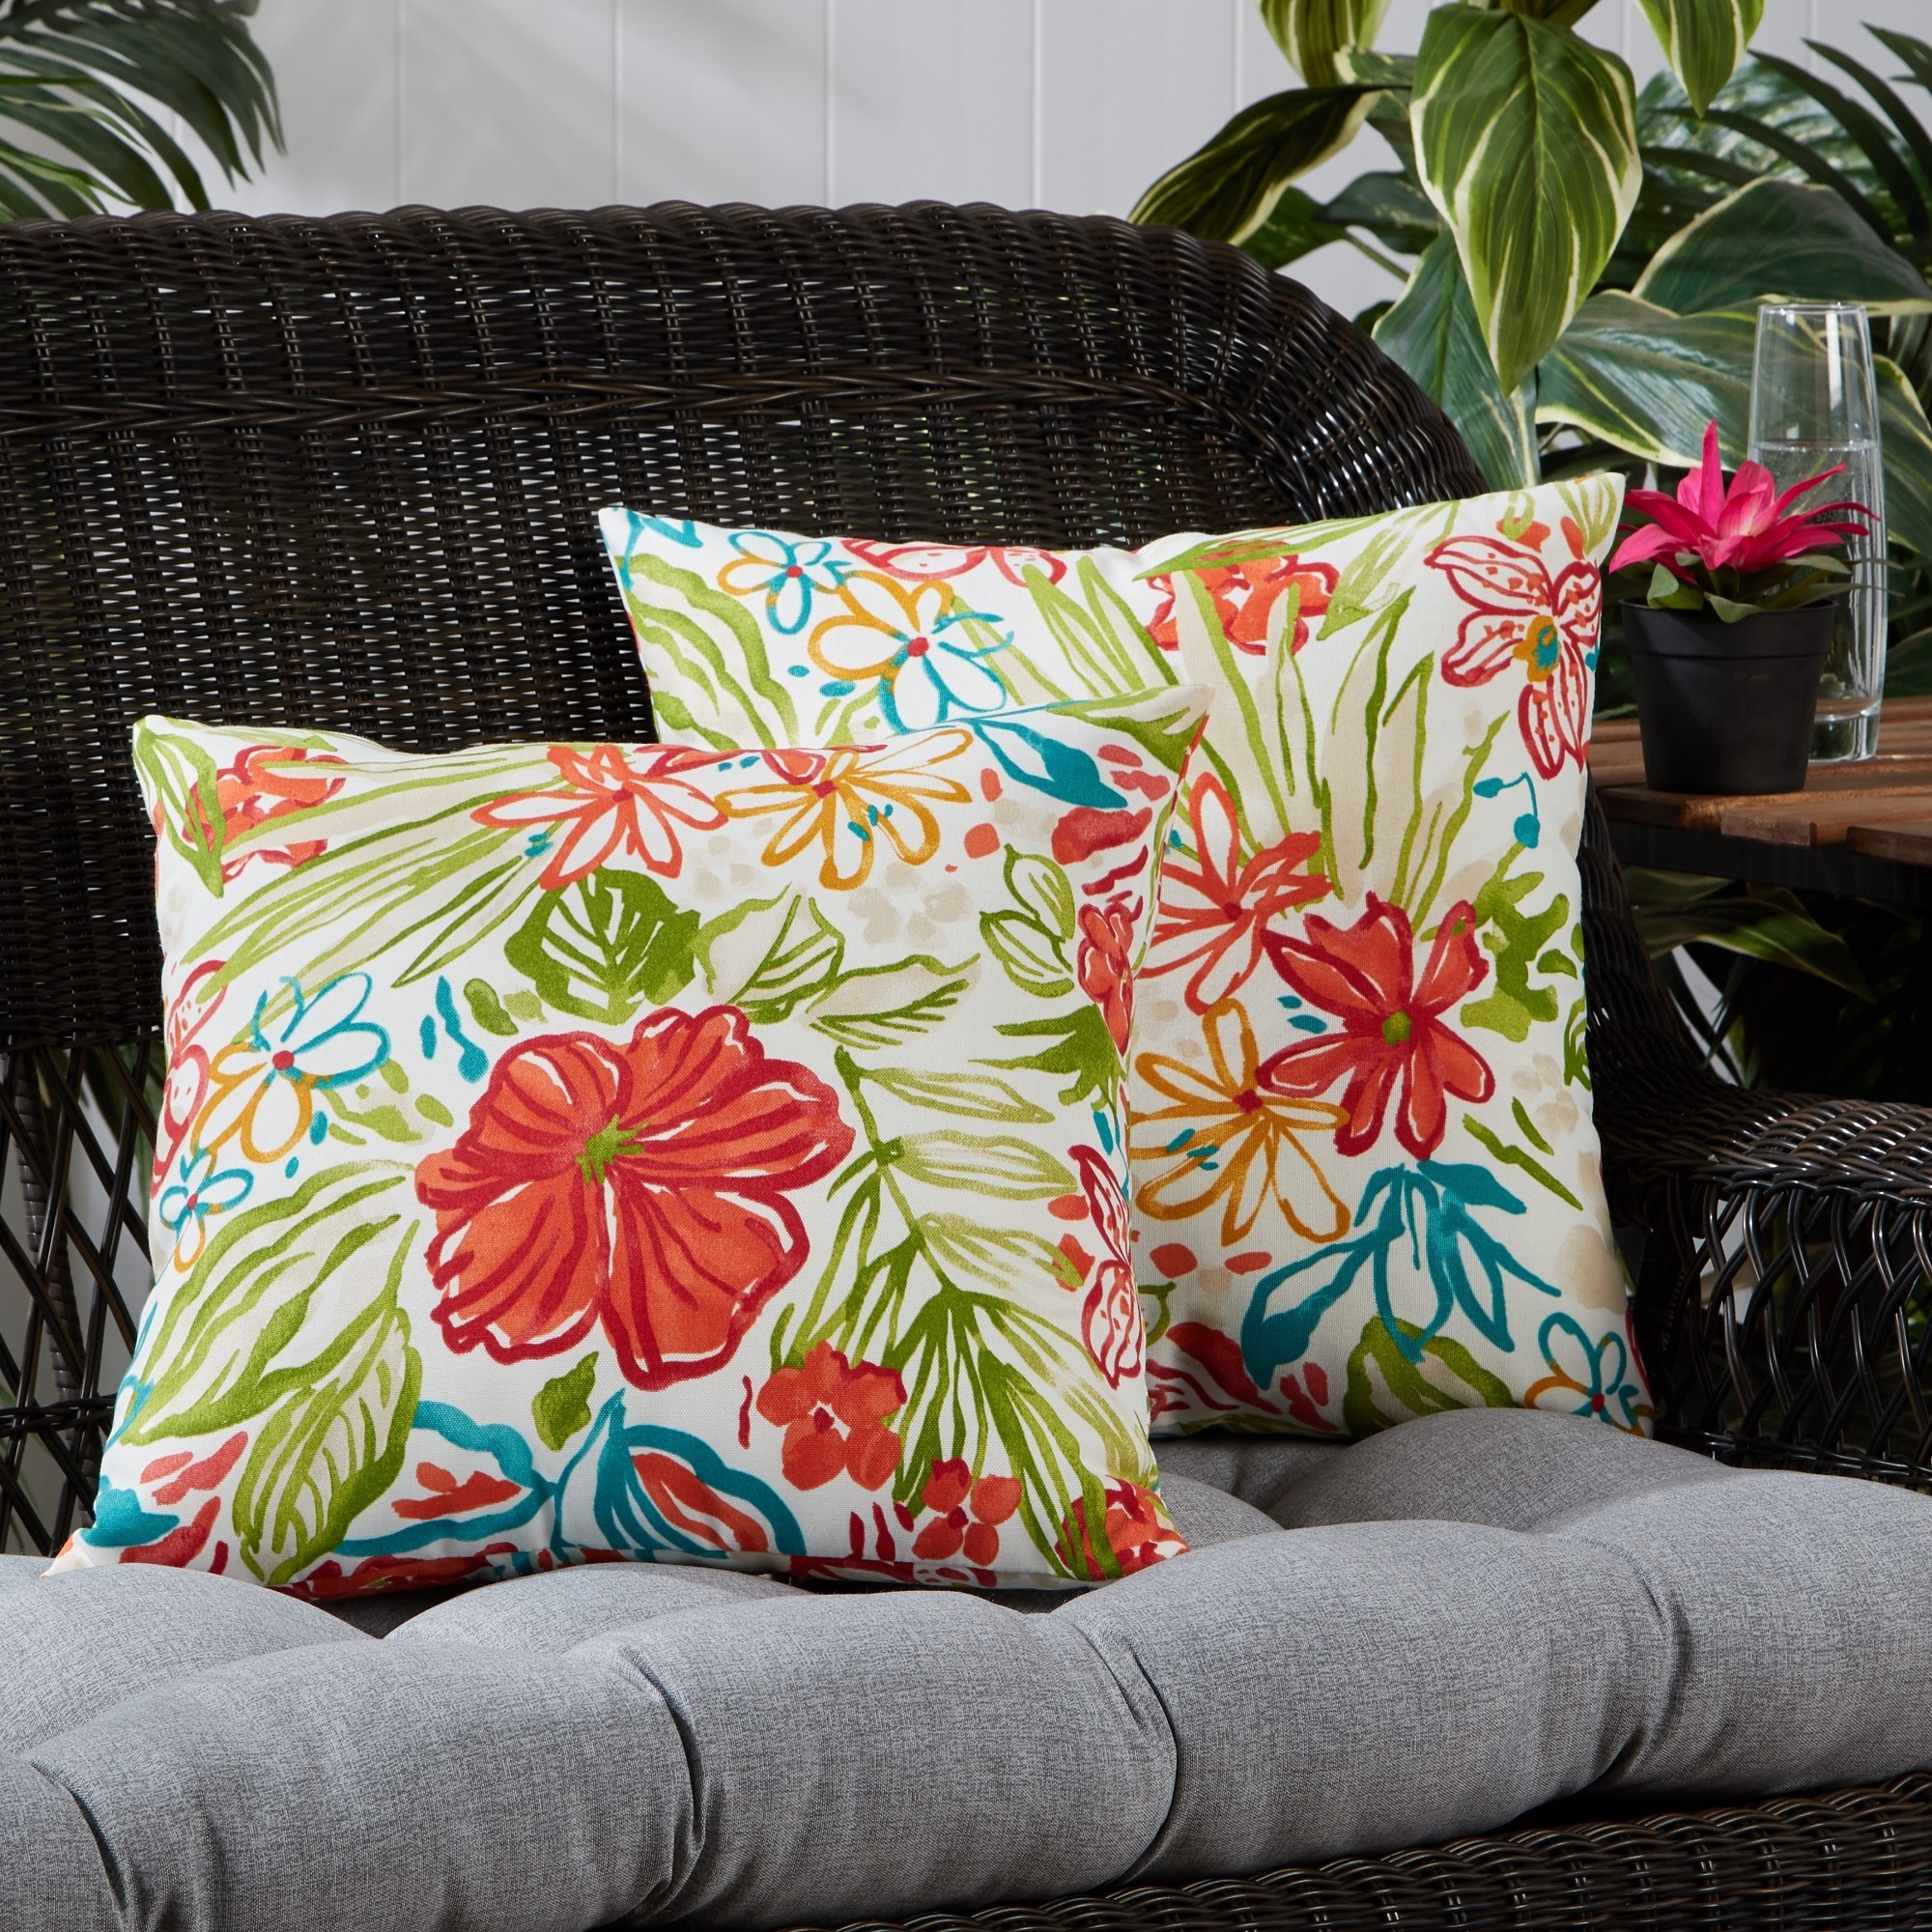 Breeze Floral Outdoor 17-inch Square Accent Pillow (Set of 2)